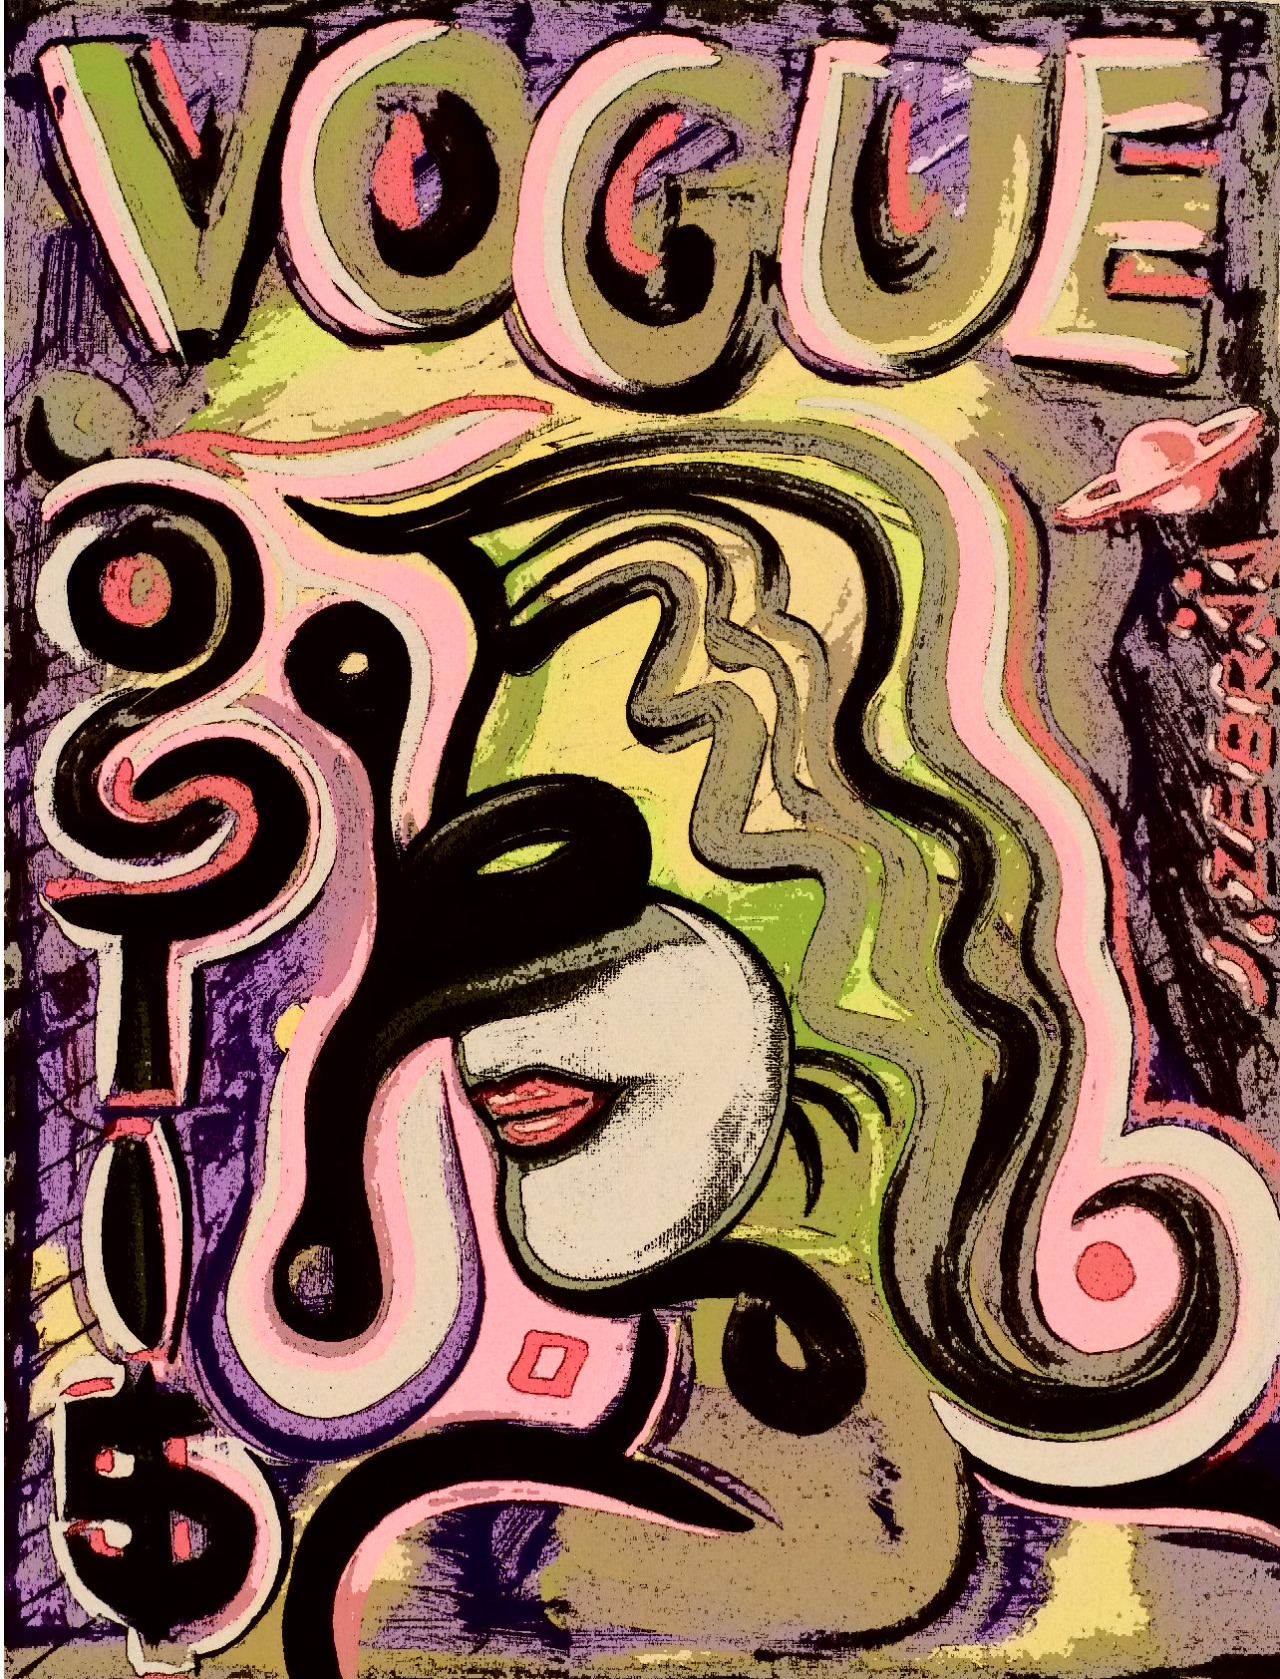 “OnThe Cover Of A Magazine” (2015) by artist Jourdan Zebraa
Acrylic on Canvas
14x18
#VOGUE #Digital #Electric #WarholWednesday #jzebraa